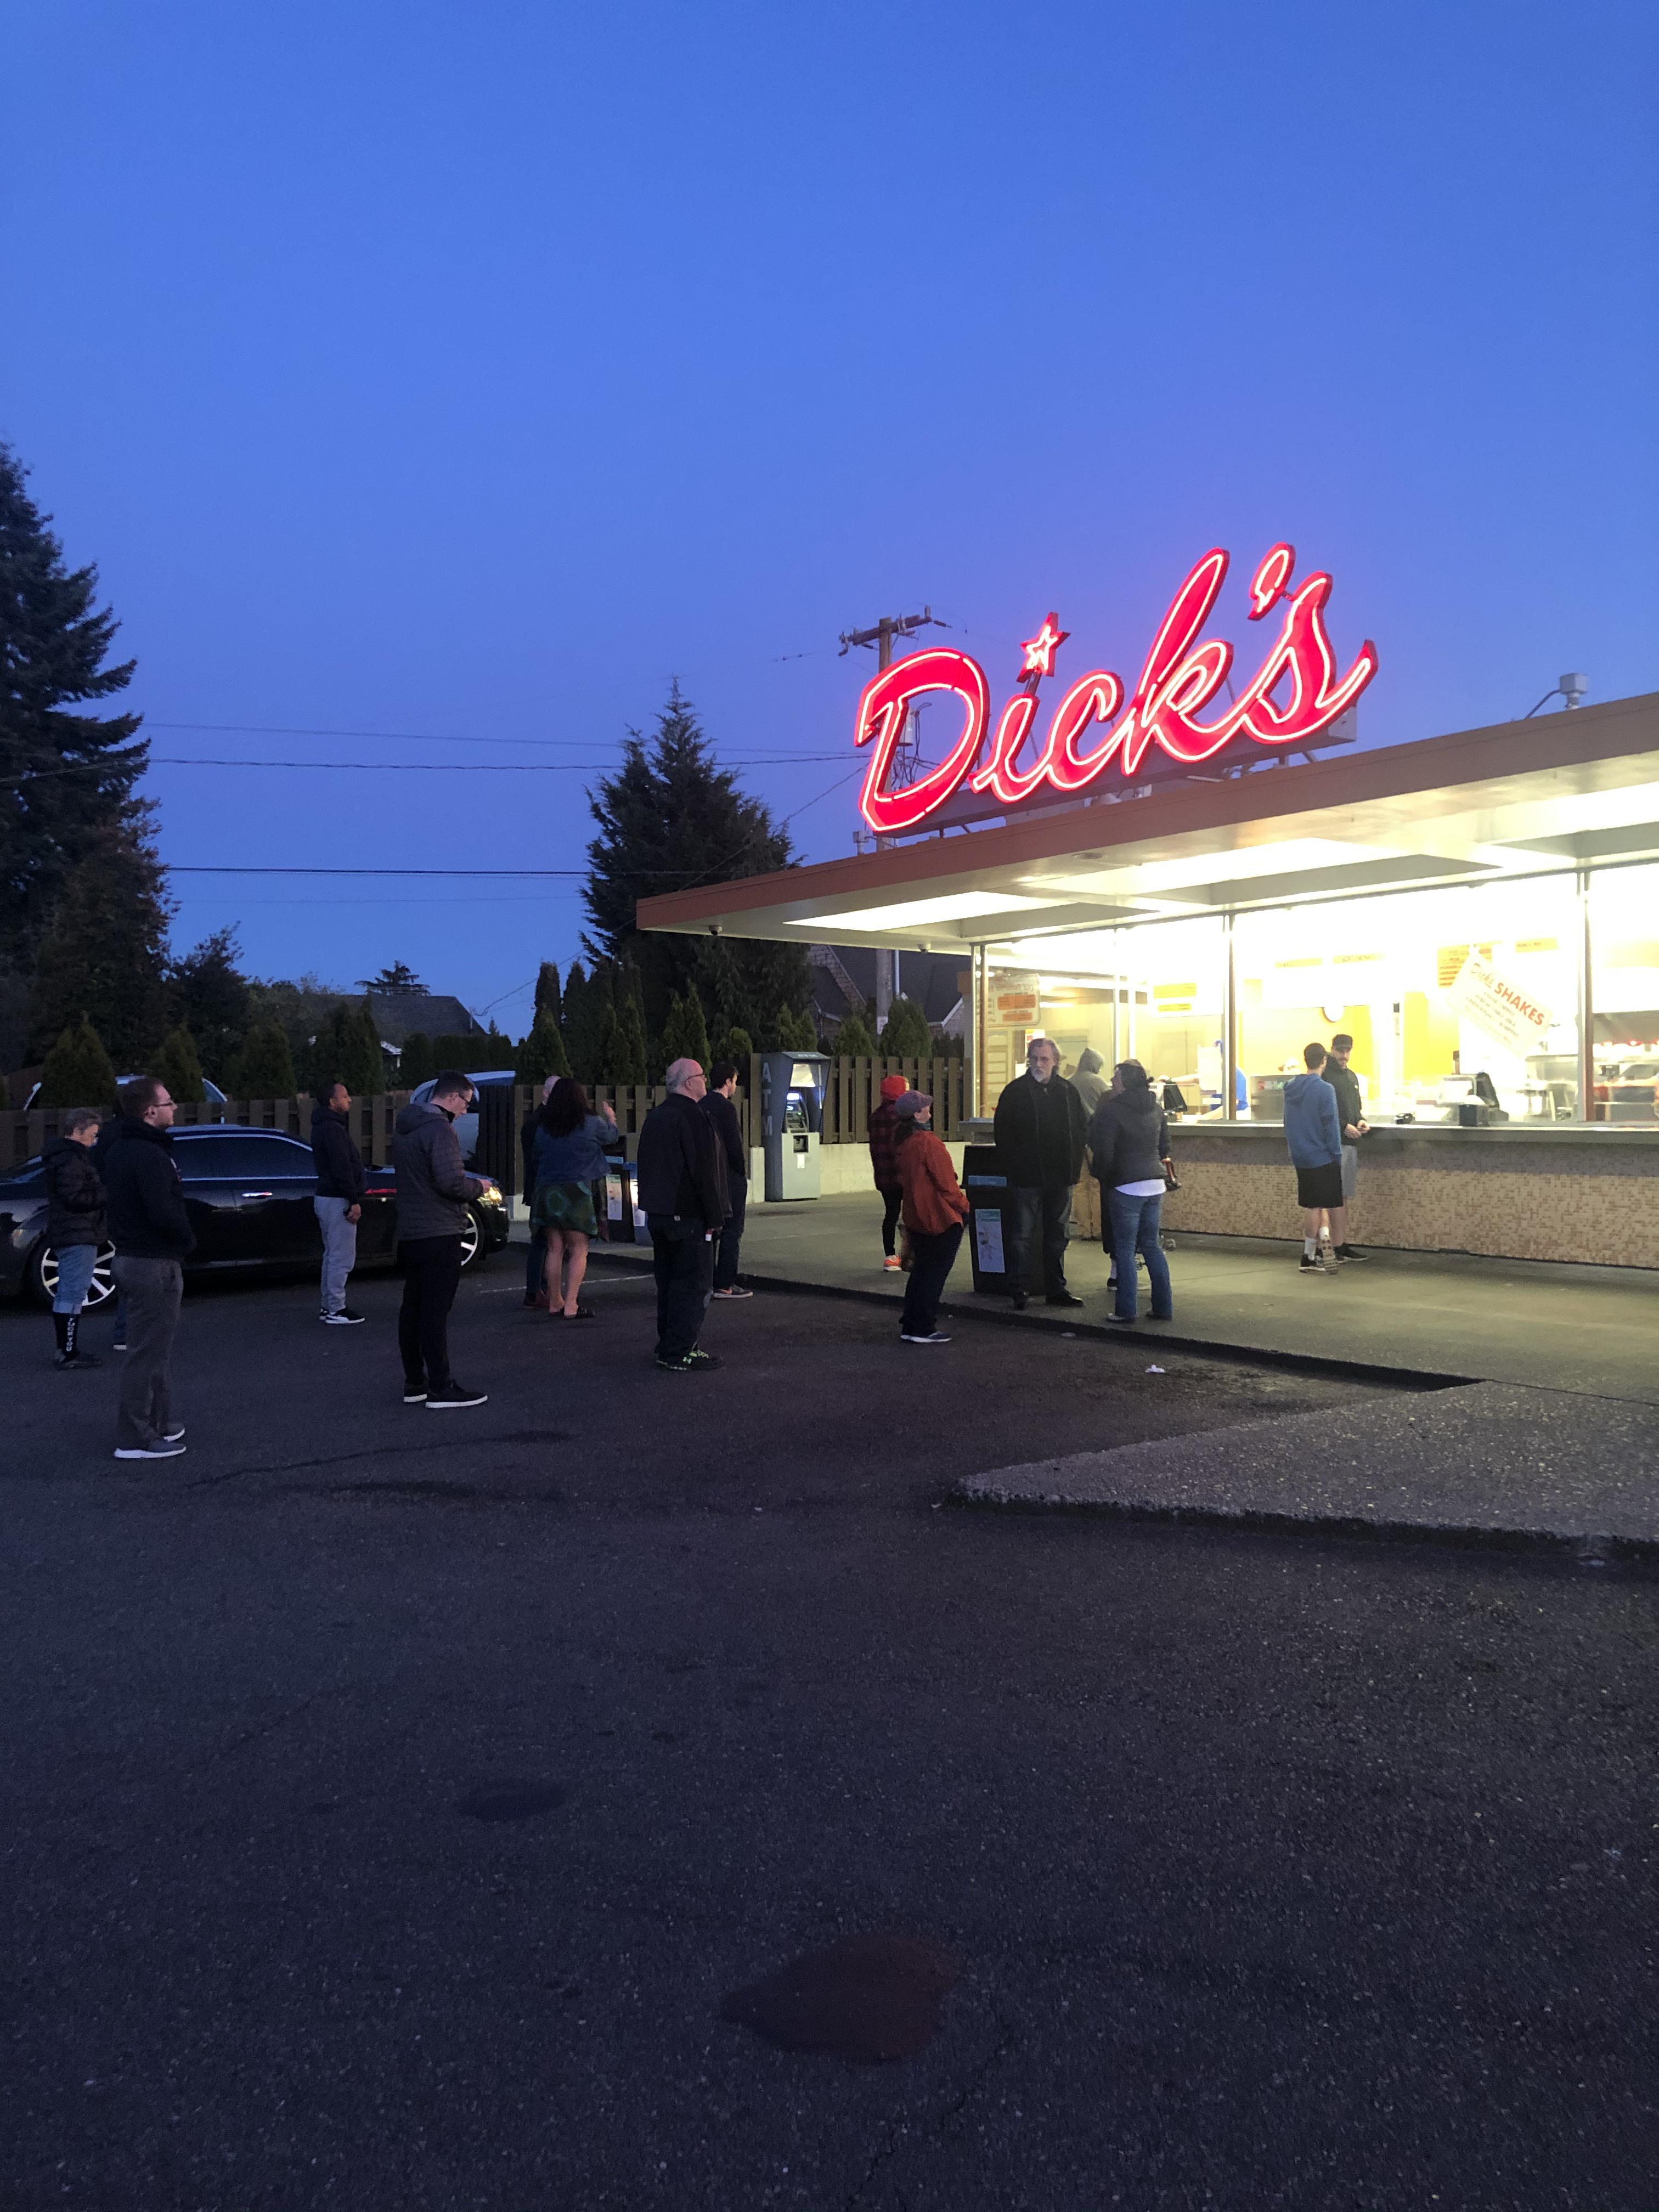 The Dick's are properly social-distancing in Seattle.